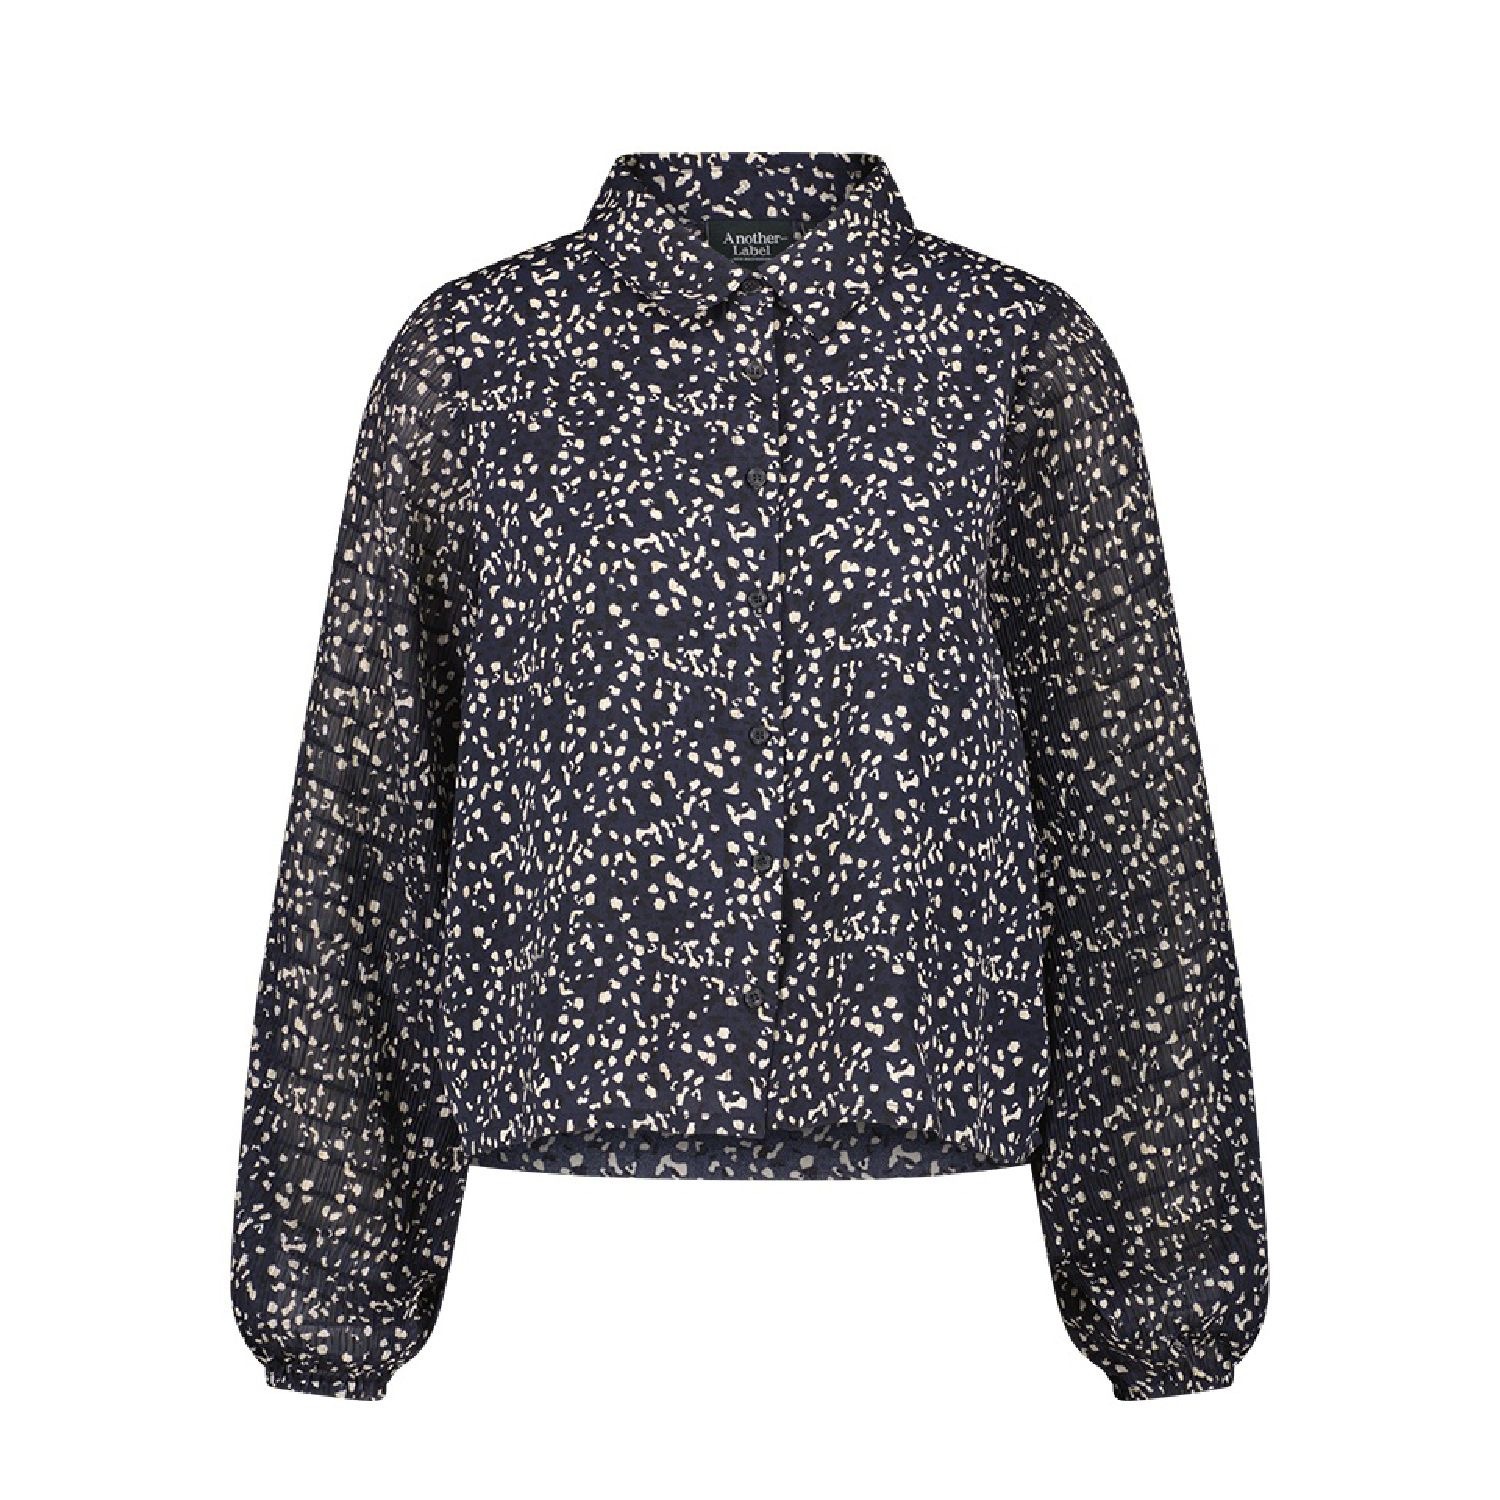 Macy dot shirt l/s | Another Label